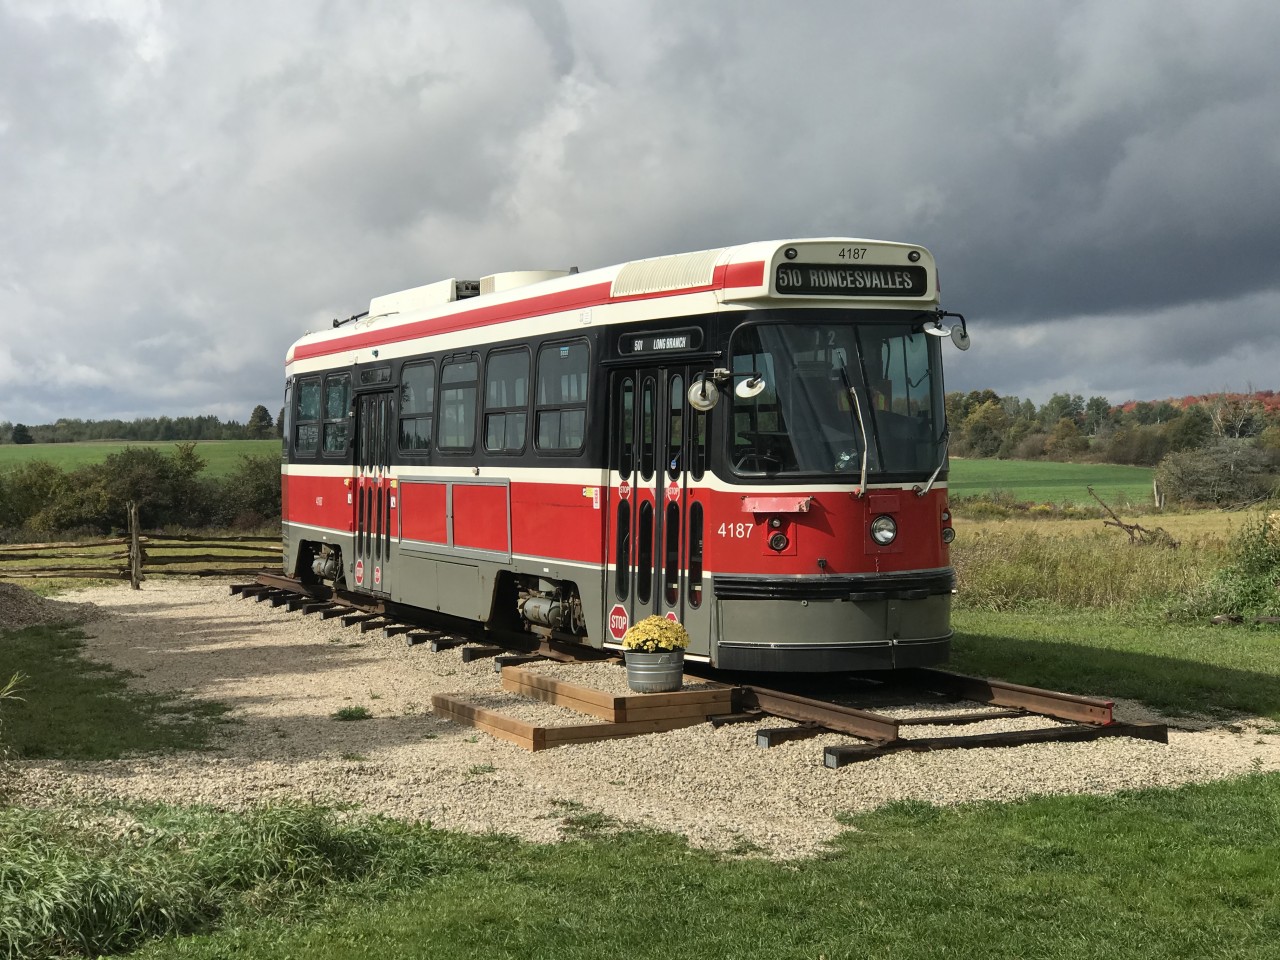 After a distinguished career in Toronto with the TTC, Canadian Light Rail Vehicle (CLRV) 4187 rests on Glista Family Farms in Priceville, Ontario. 4187 entered service in 1981, and was removed from service on December 29th, 2019. 

4187 was purchased at auction in late May 2020. On July 31st, 2020, it left the TTC’s Russel Yard for its new home in Priceville, Ontario. It was the last CLRV to leave TTC property. It is currently resting a mere 100 metres away from the former Canadian Pacific Walkerton Subdivision, which was torn up in 1984. In a roundabout way, trains have returned to Priceville. 

4187 will be restored and preserved, with no major alterations planned for it. Future work will include running electricity to the streetcar so that the lights, gong, roll signs, and the horn function. 

To follow the process of maintaining this iconic piece of Toronto transit history, on Instagram follow @Streetcar4187  https://instagram.com/streetcar4187